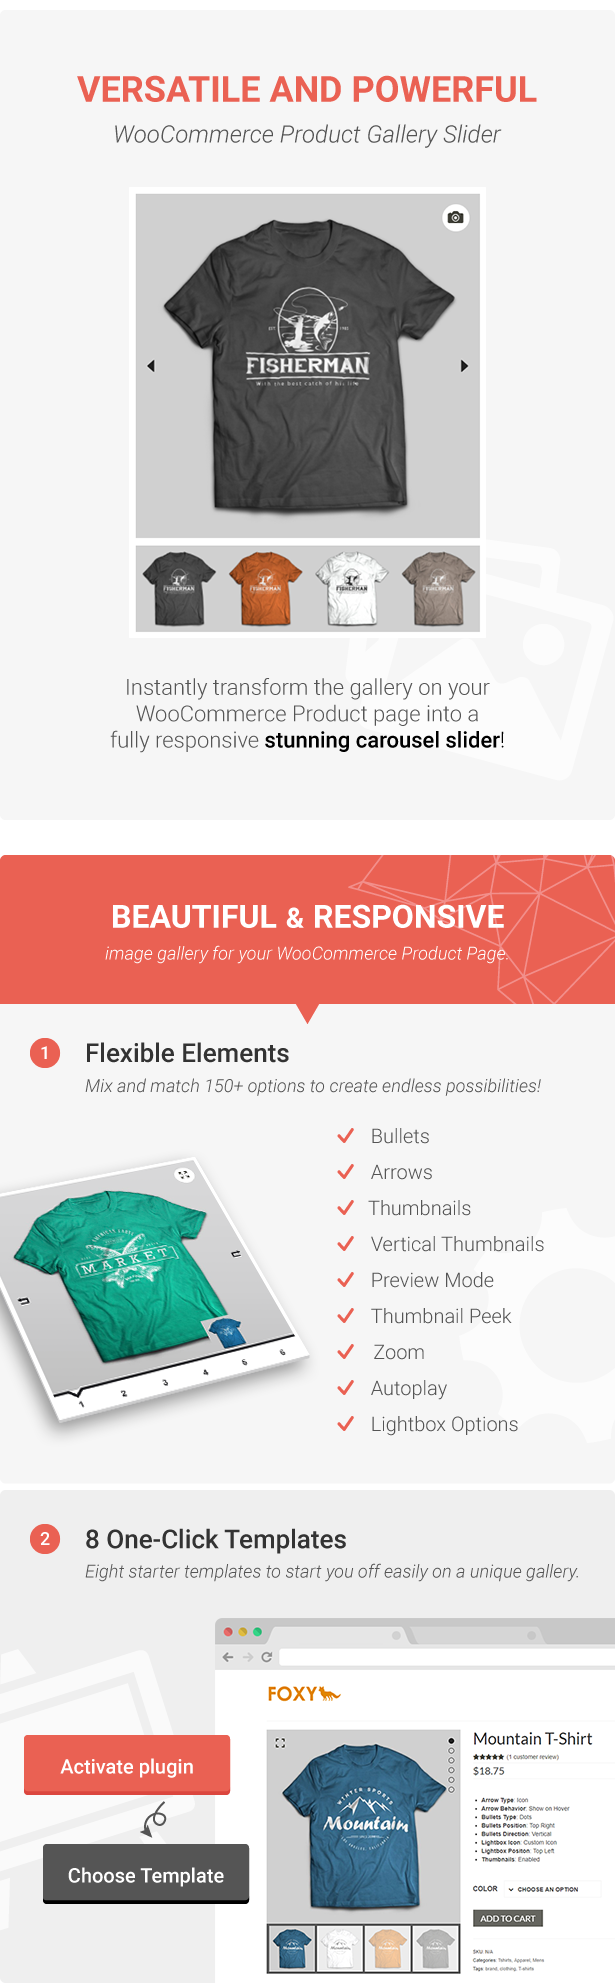 Foxy - WooCommerce Product Image Gallery Slider Carousel - 3